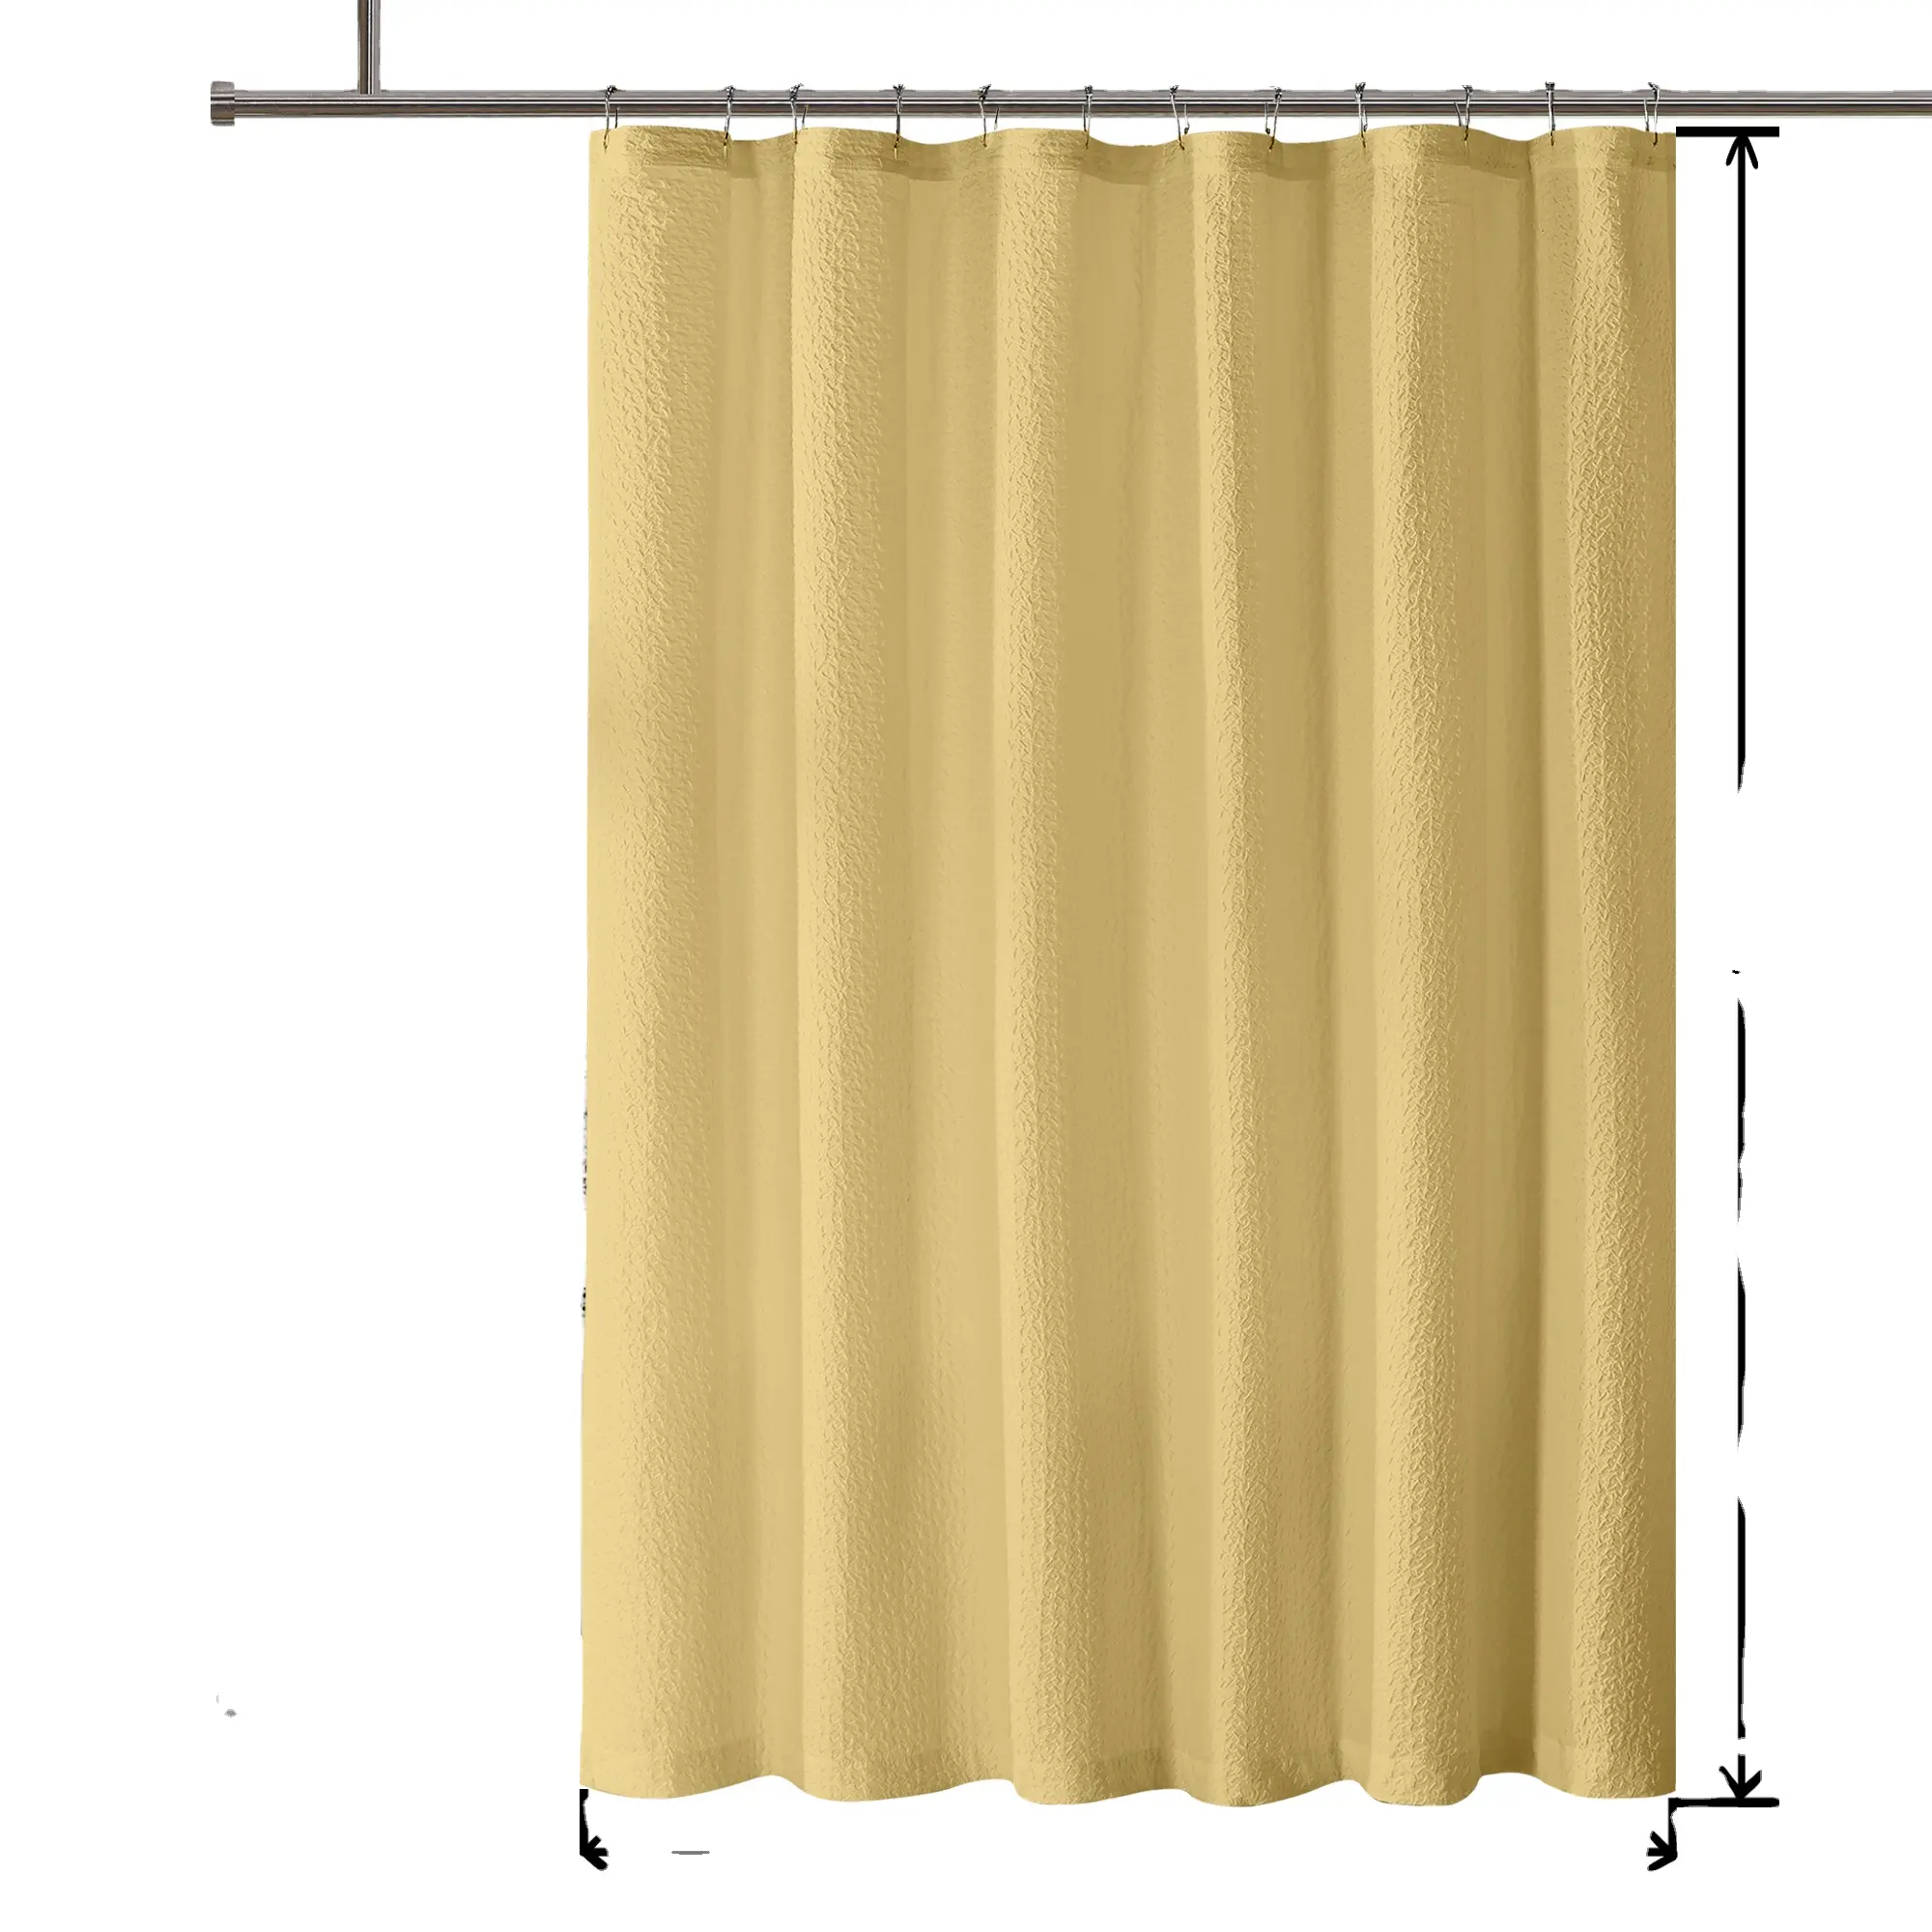 OWENIE Hot Selling Shower Curtain, 3D Embossed Textured Yellow Shower Curtain for Bathroom, Geometric Polyester Fabric